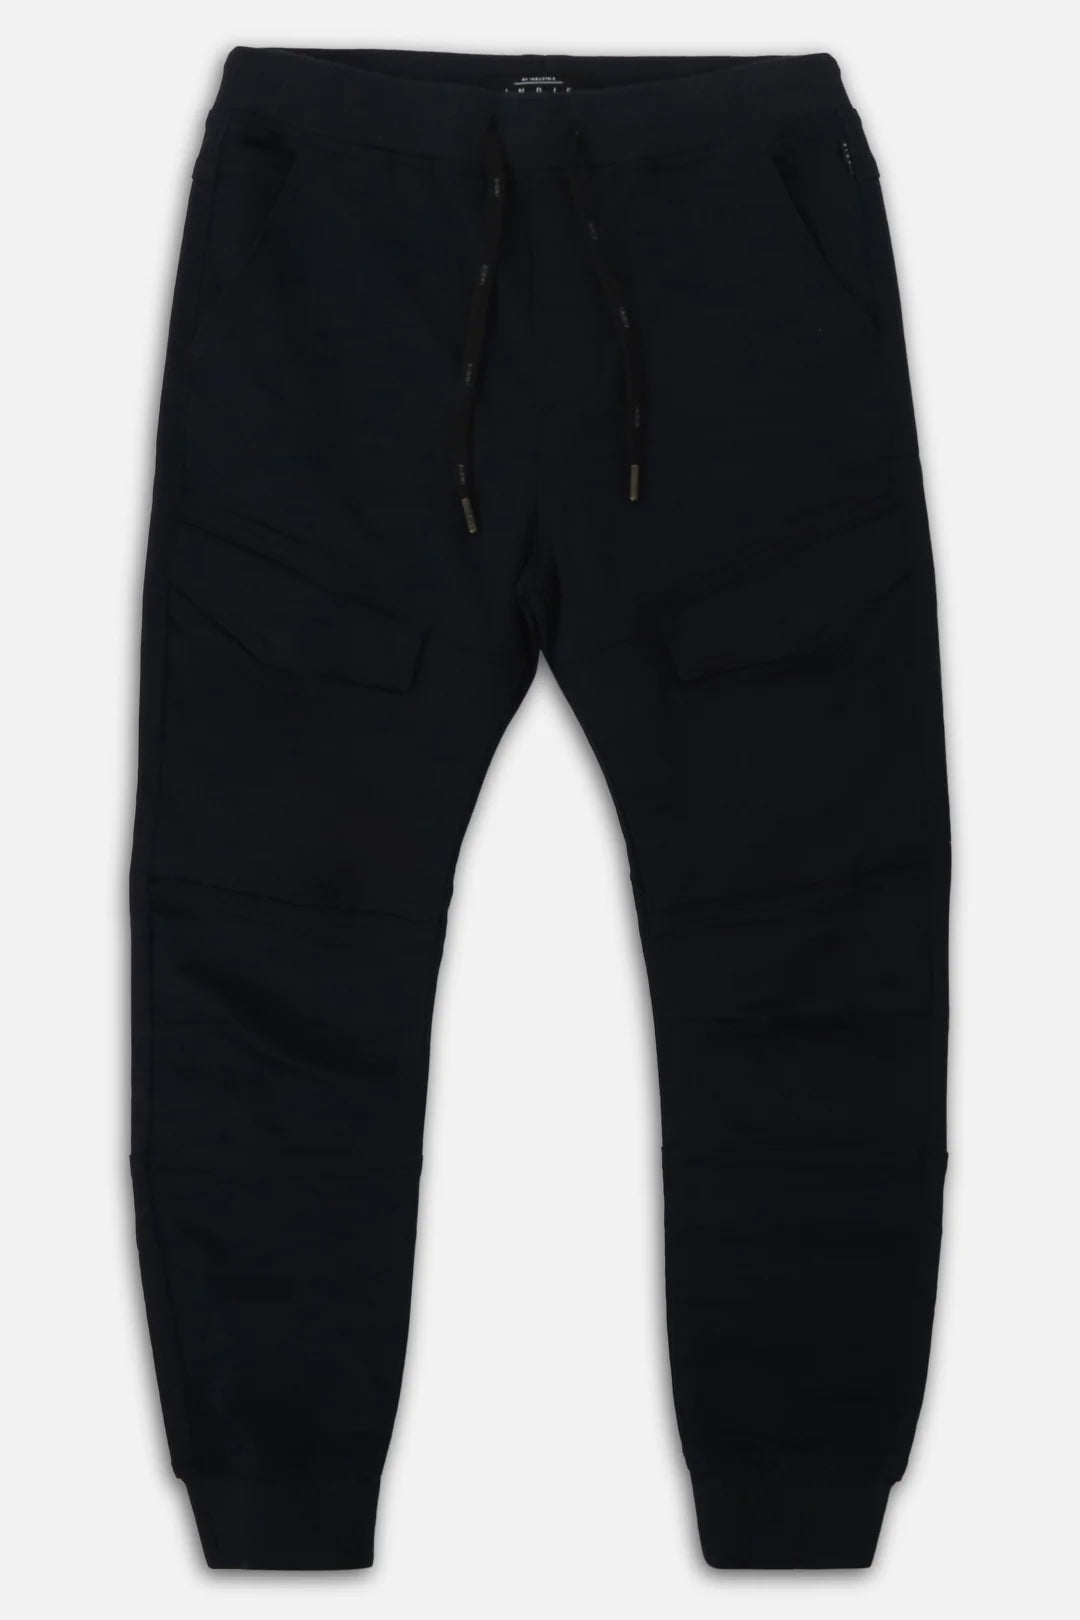 Indie Kids Arched Drifter Pant - Raw (3-7 Years)